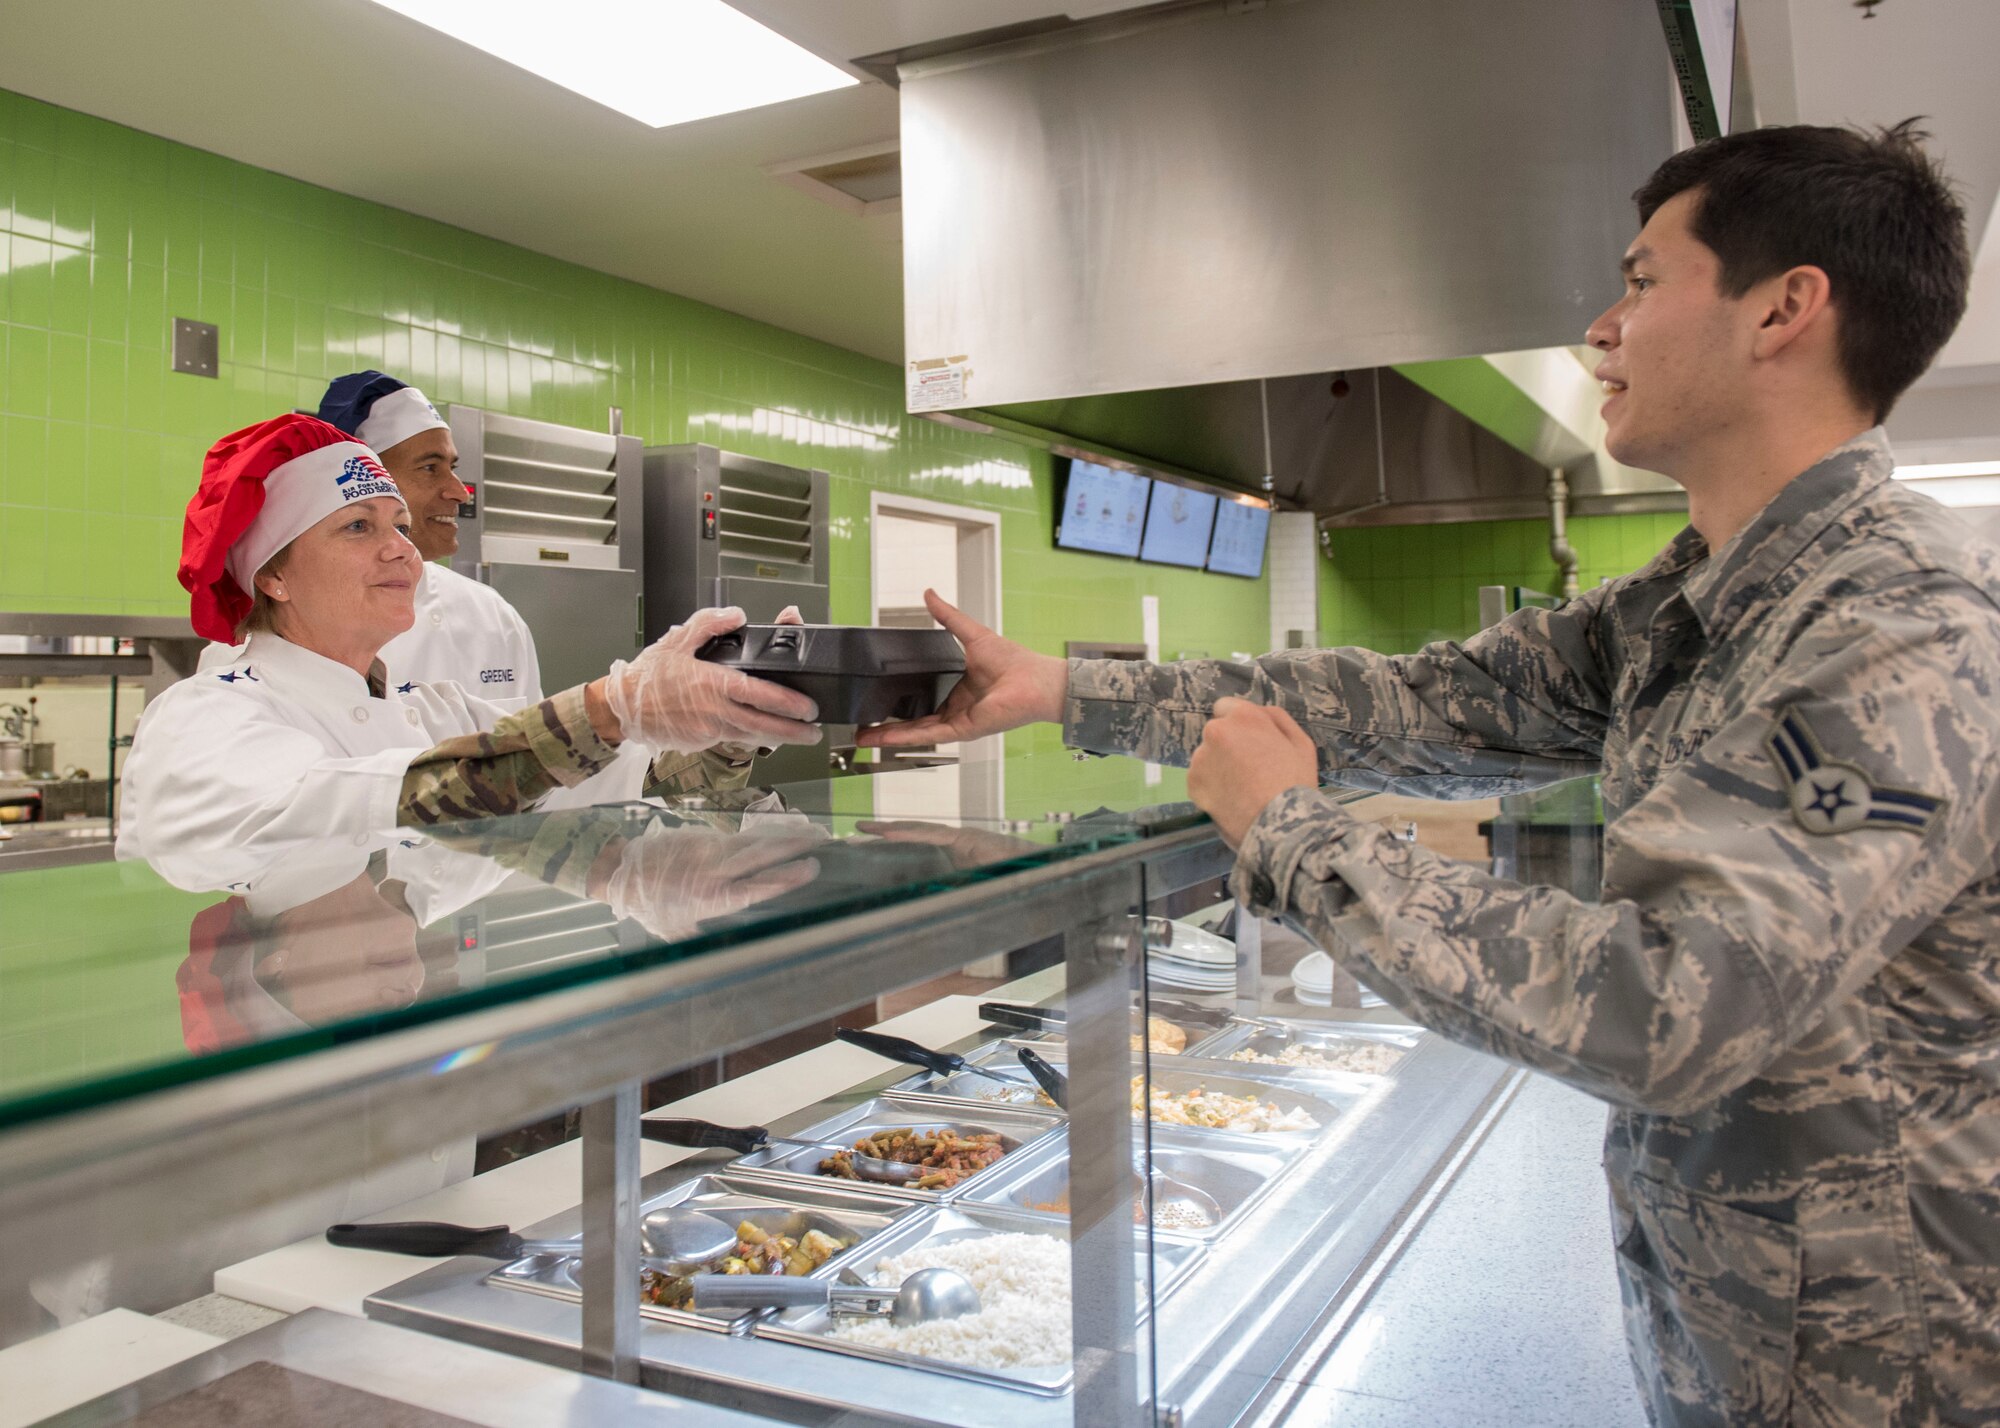 Gen. Maryanne Miller, left, commander of Air Mobility Command, and Chief Master Sgt. Terrence Greene, AMC command chief master sergeant, serve an Airman food at the Gaylor Dining Facility during a visit to Joint Base Charleston, South Carolina, July 30, 2019. Miller and Greene visited JB Charleston July 29 to August 1 to get a first-hand look at mission capabilities, new innovative programs and how JB Charleston is taking care of its service members to build a stronger mobility force.  The dining facility re-opened February 2019 after a two-year renovation. The renovations help dining facility personnel adjust to changing dietary needs and preferences, and improves efficiency and reduces costs while maintaining mission feeding capabilities.